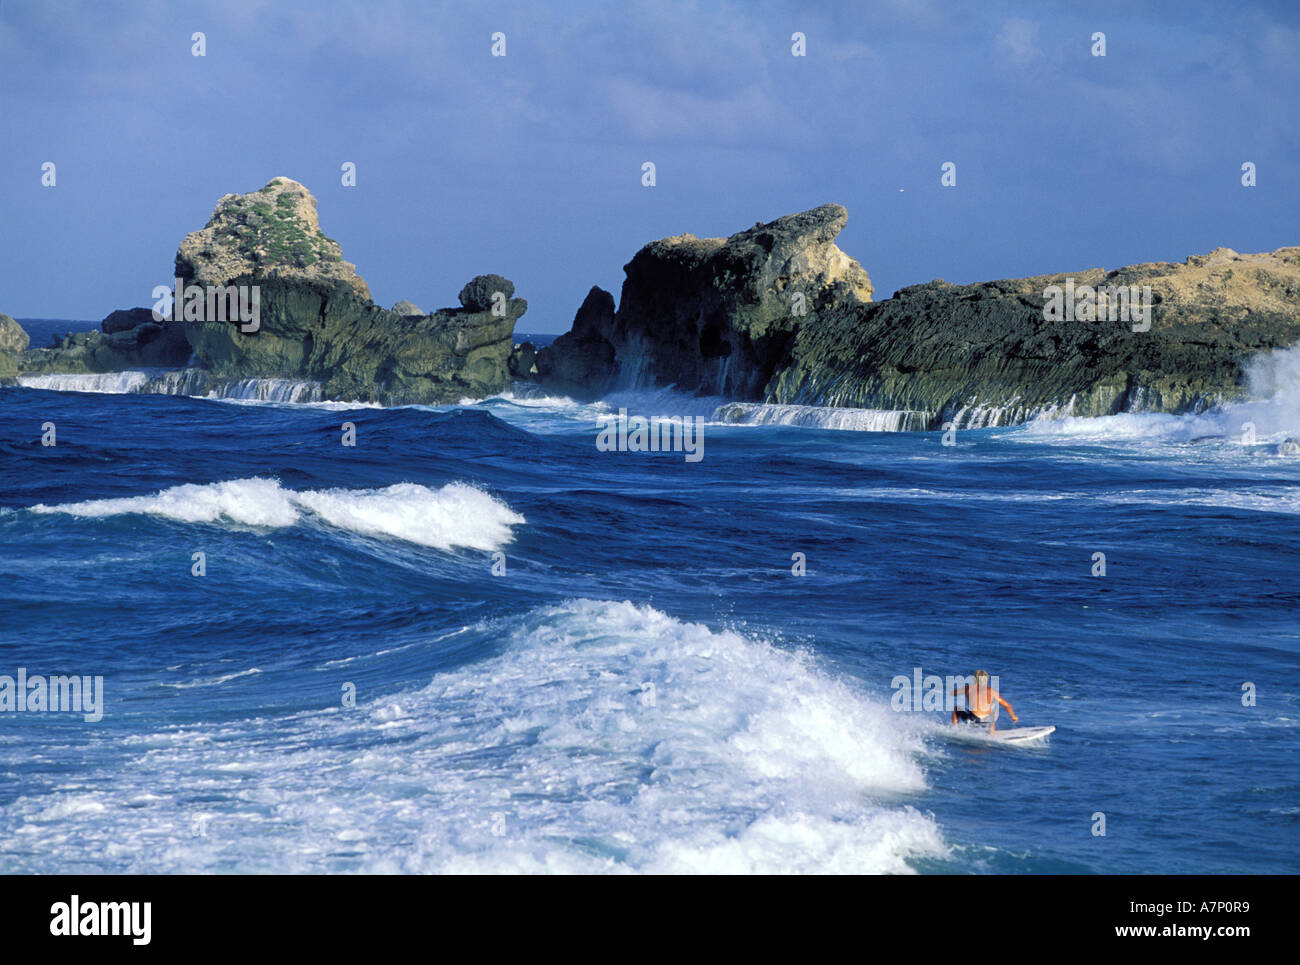 France, Guadeloupe (French West Indies), Grande Terre, Pointe a